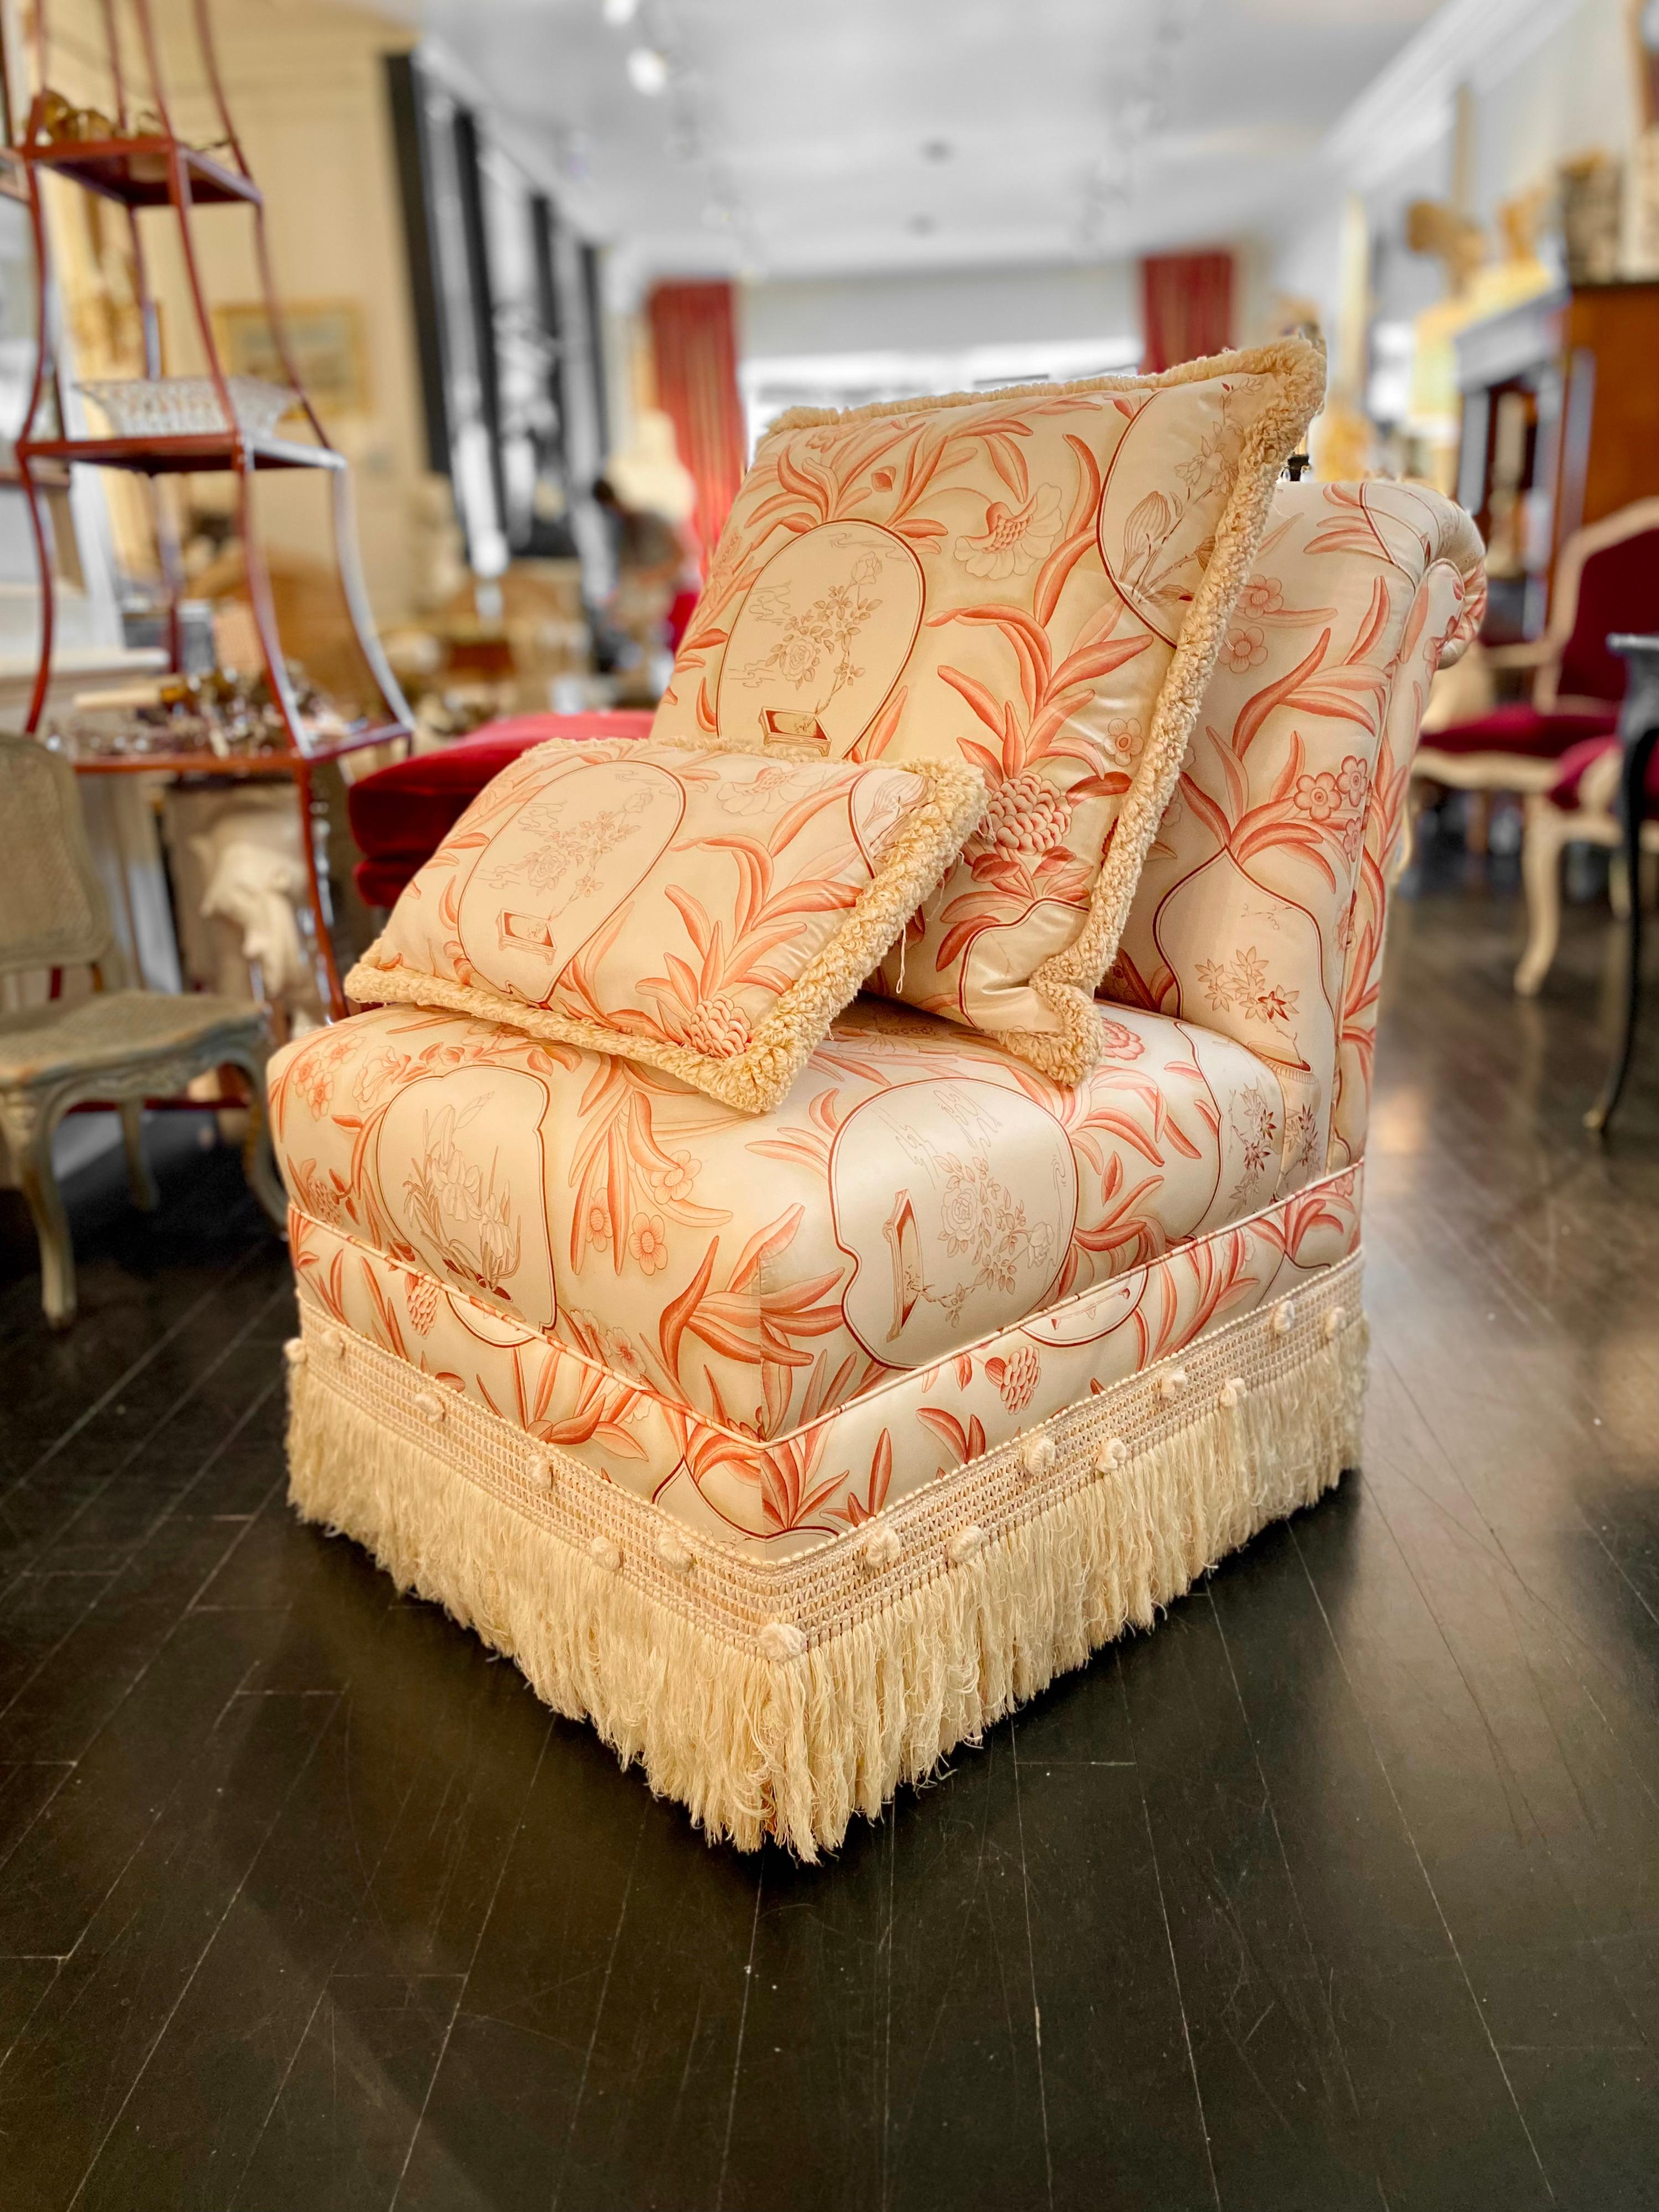 Hollywood Regency Pair of Slipper Chairs, Mid-Century Modern, Upholstered Toile Chinoiserie Motif